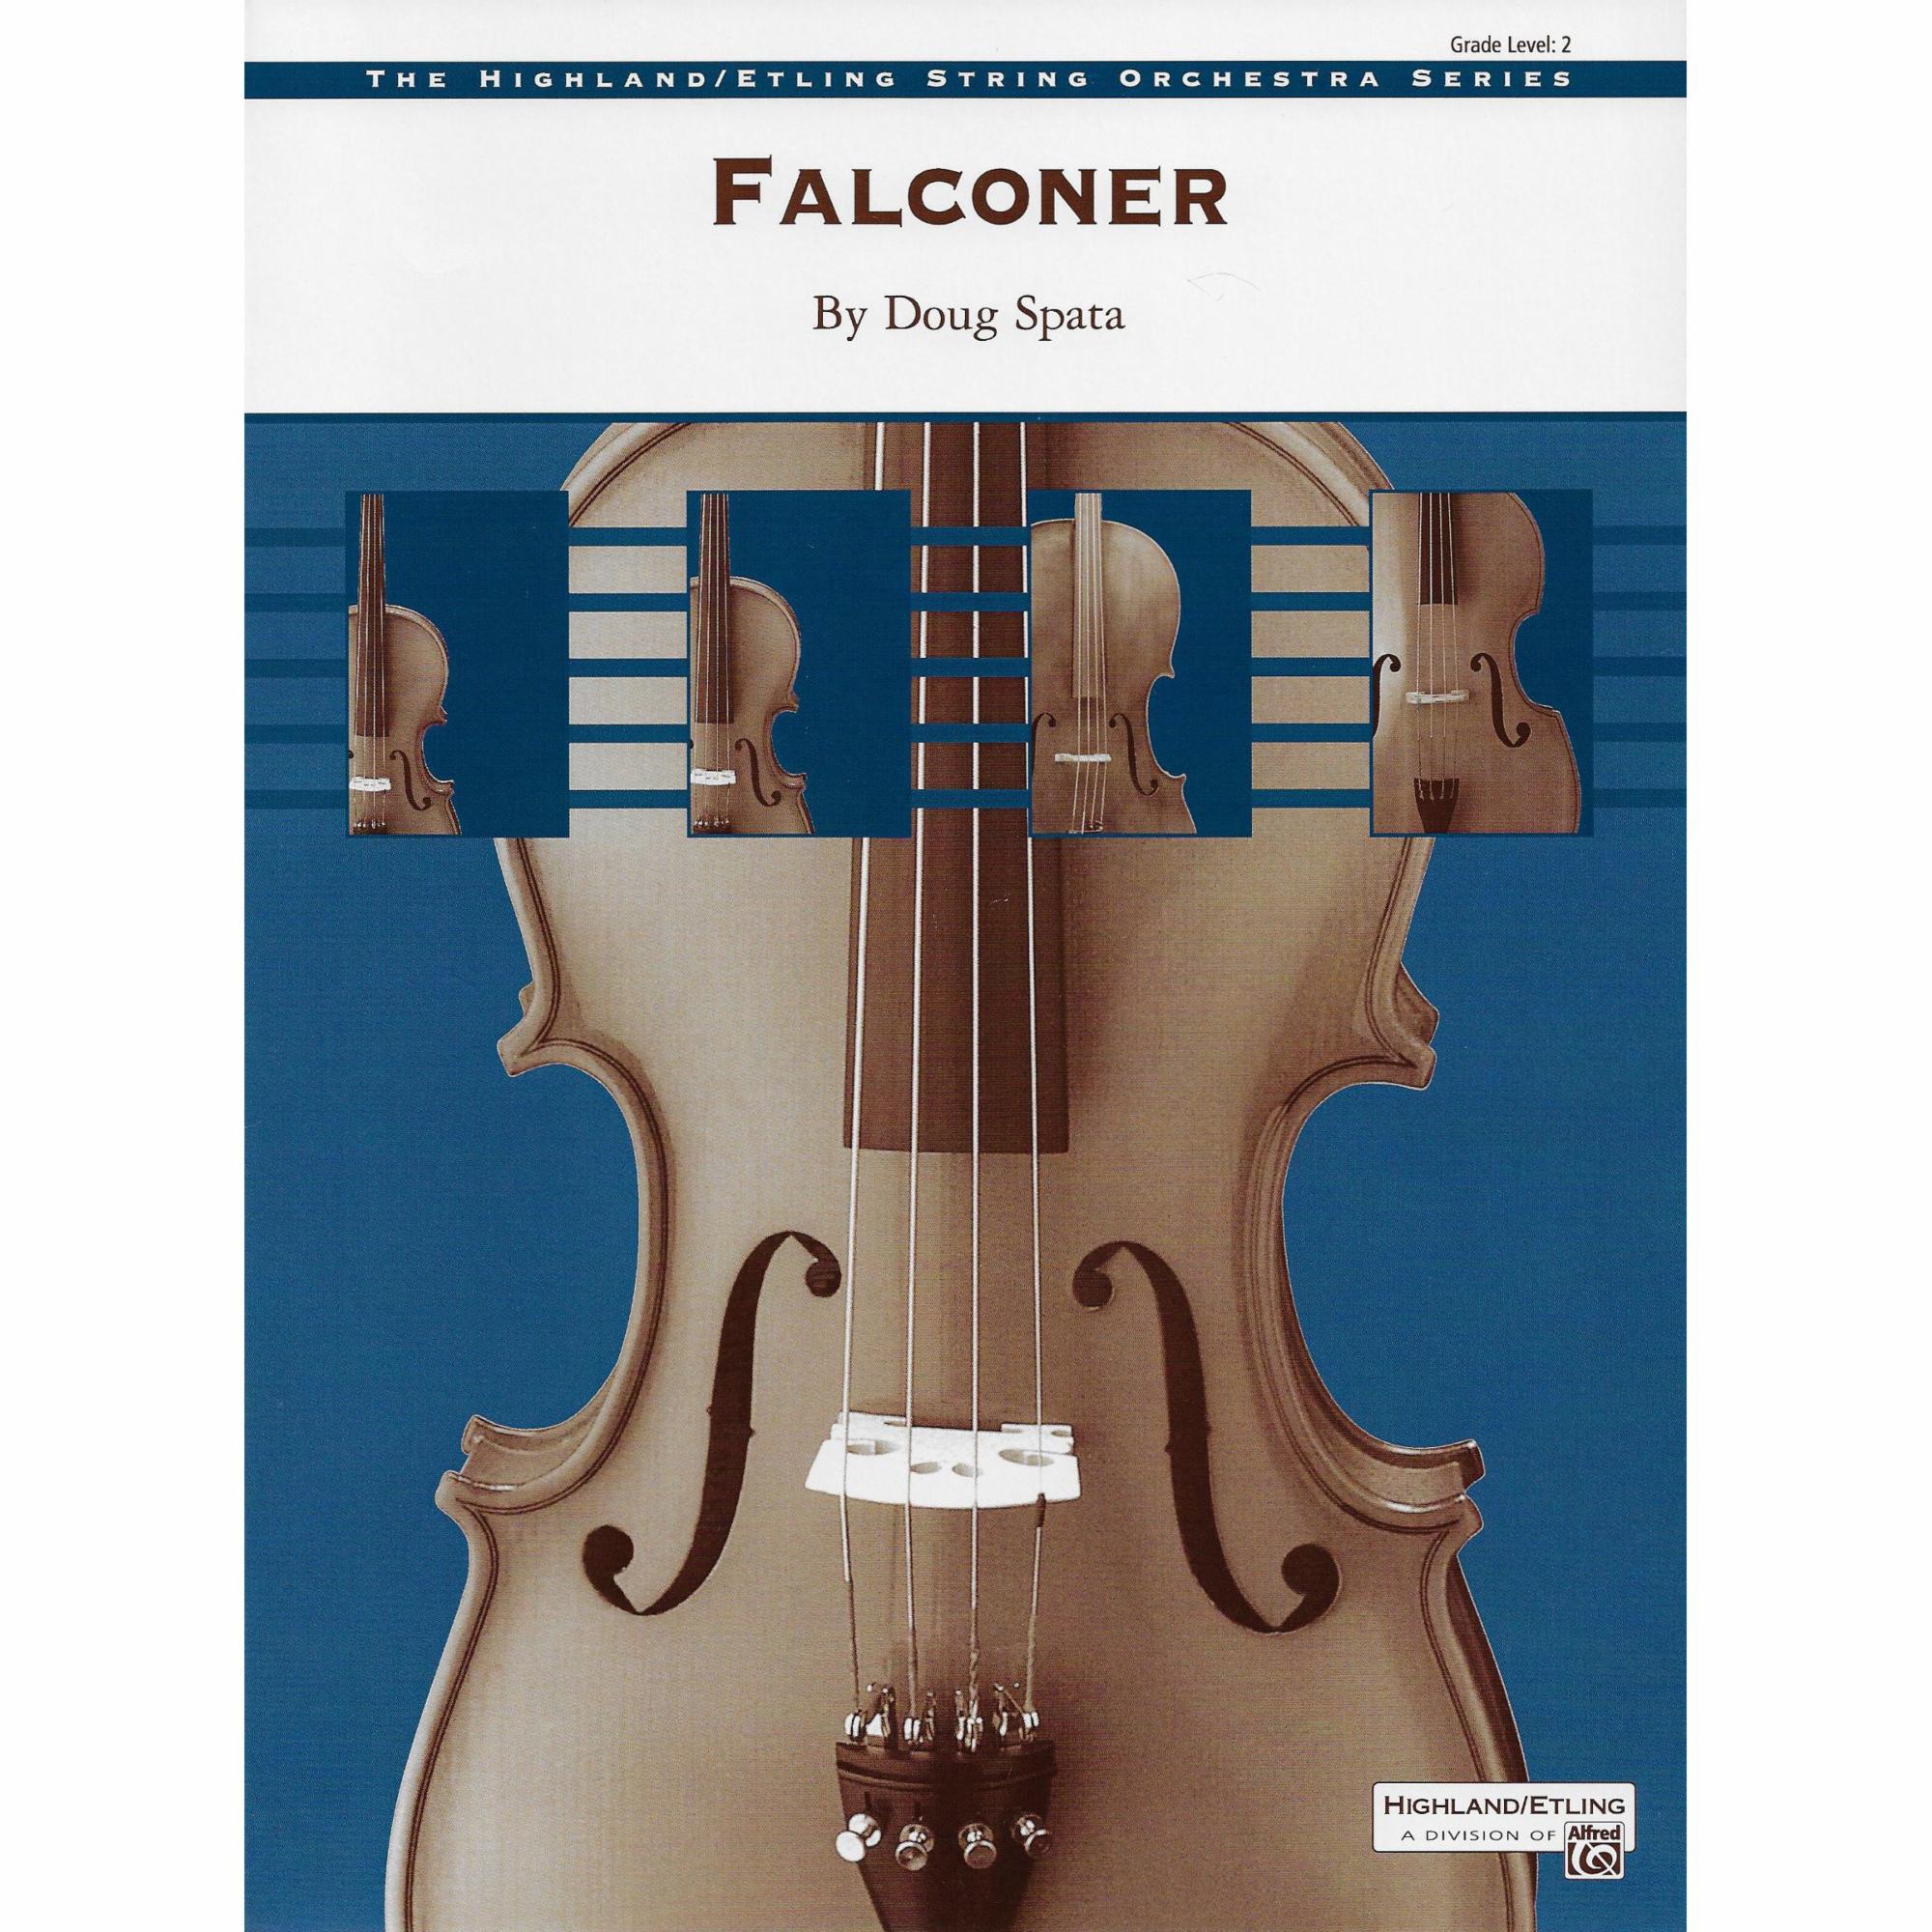 Falconer for String Orchestra